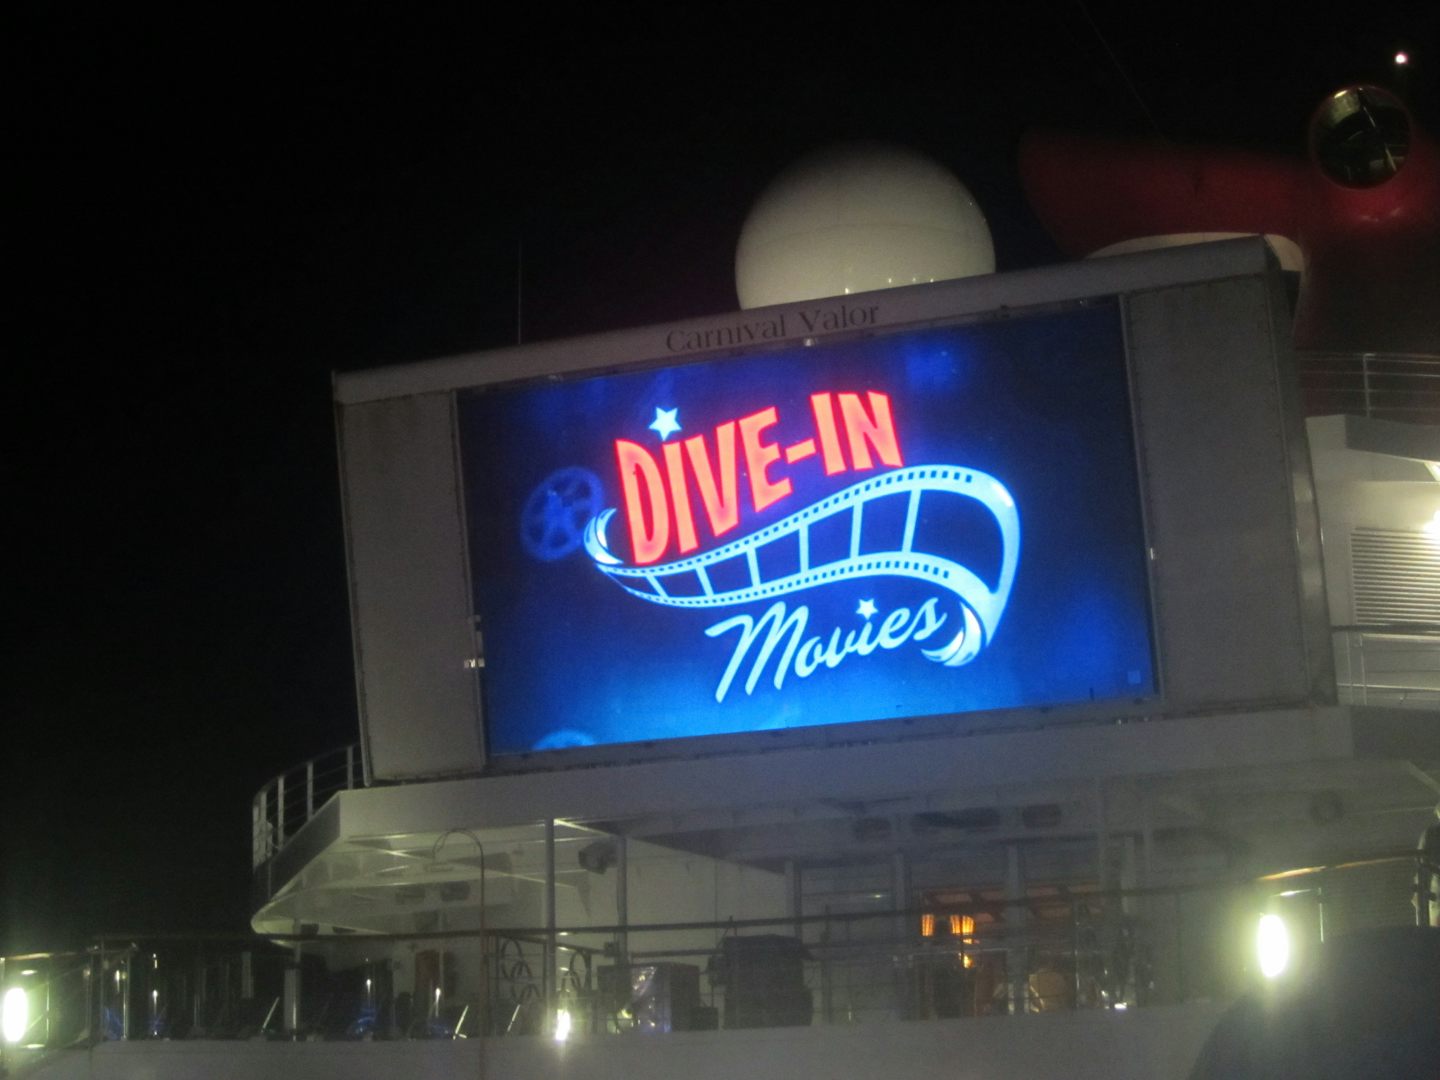 Dive-in Movies on the pool deck at night